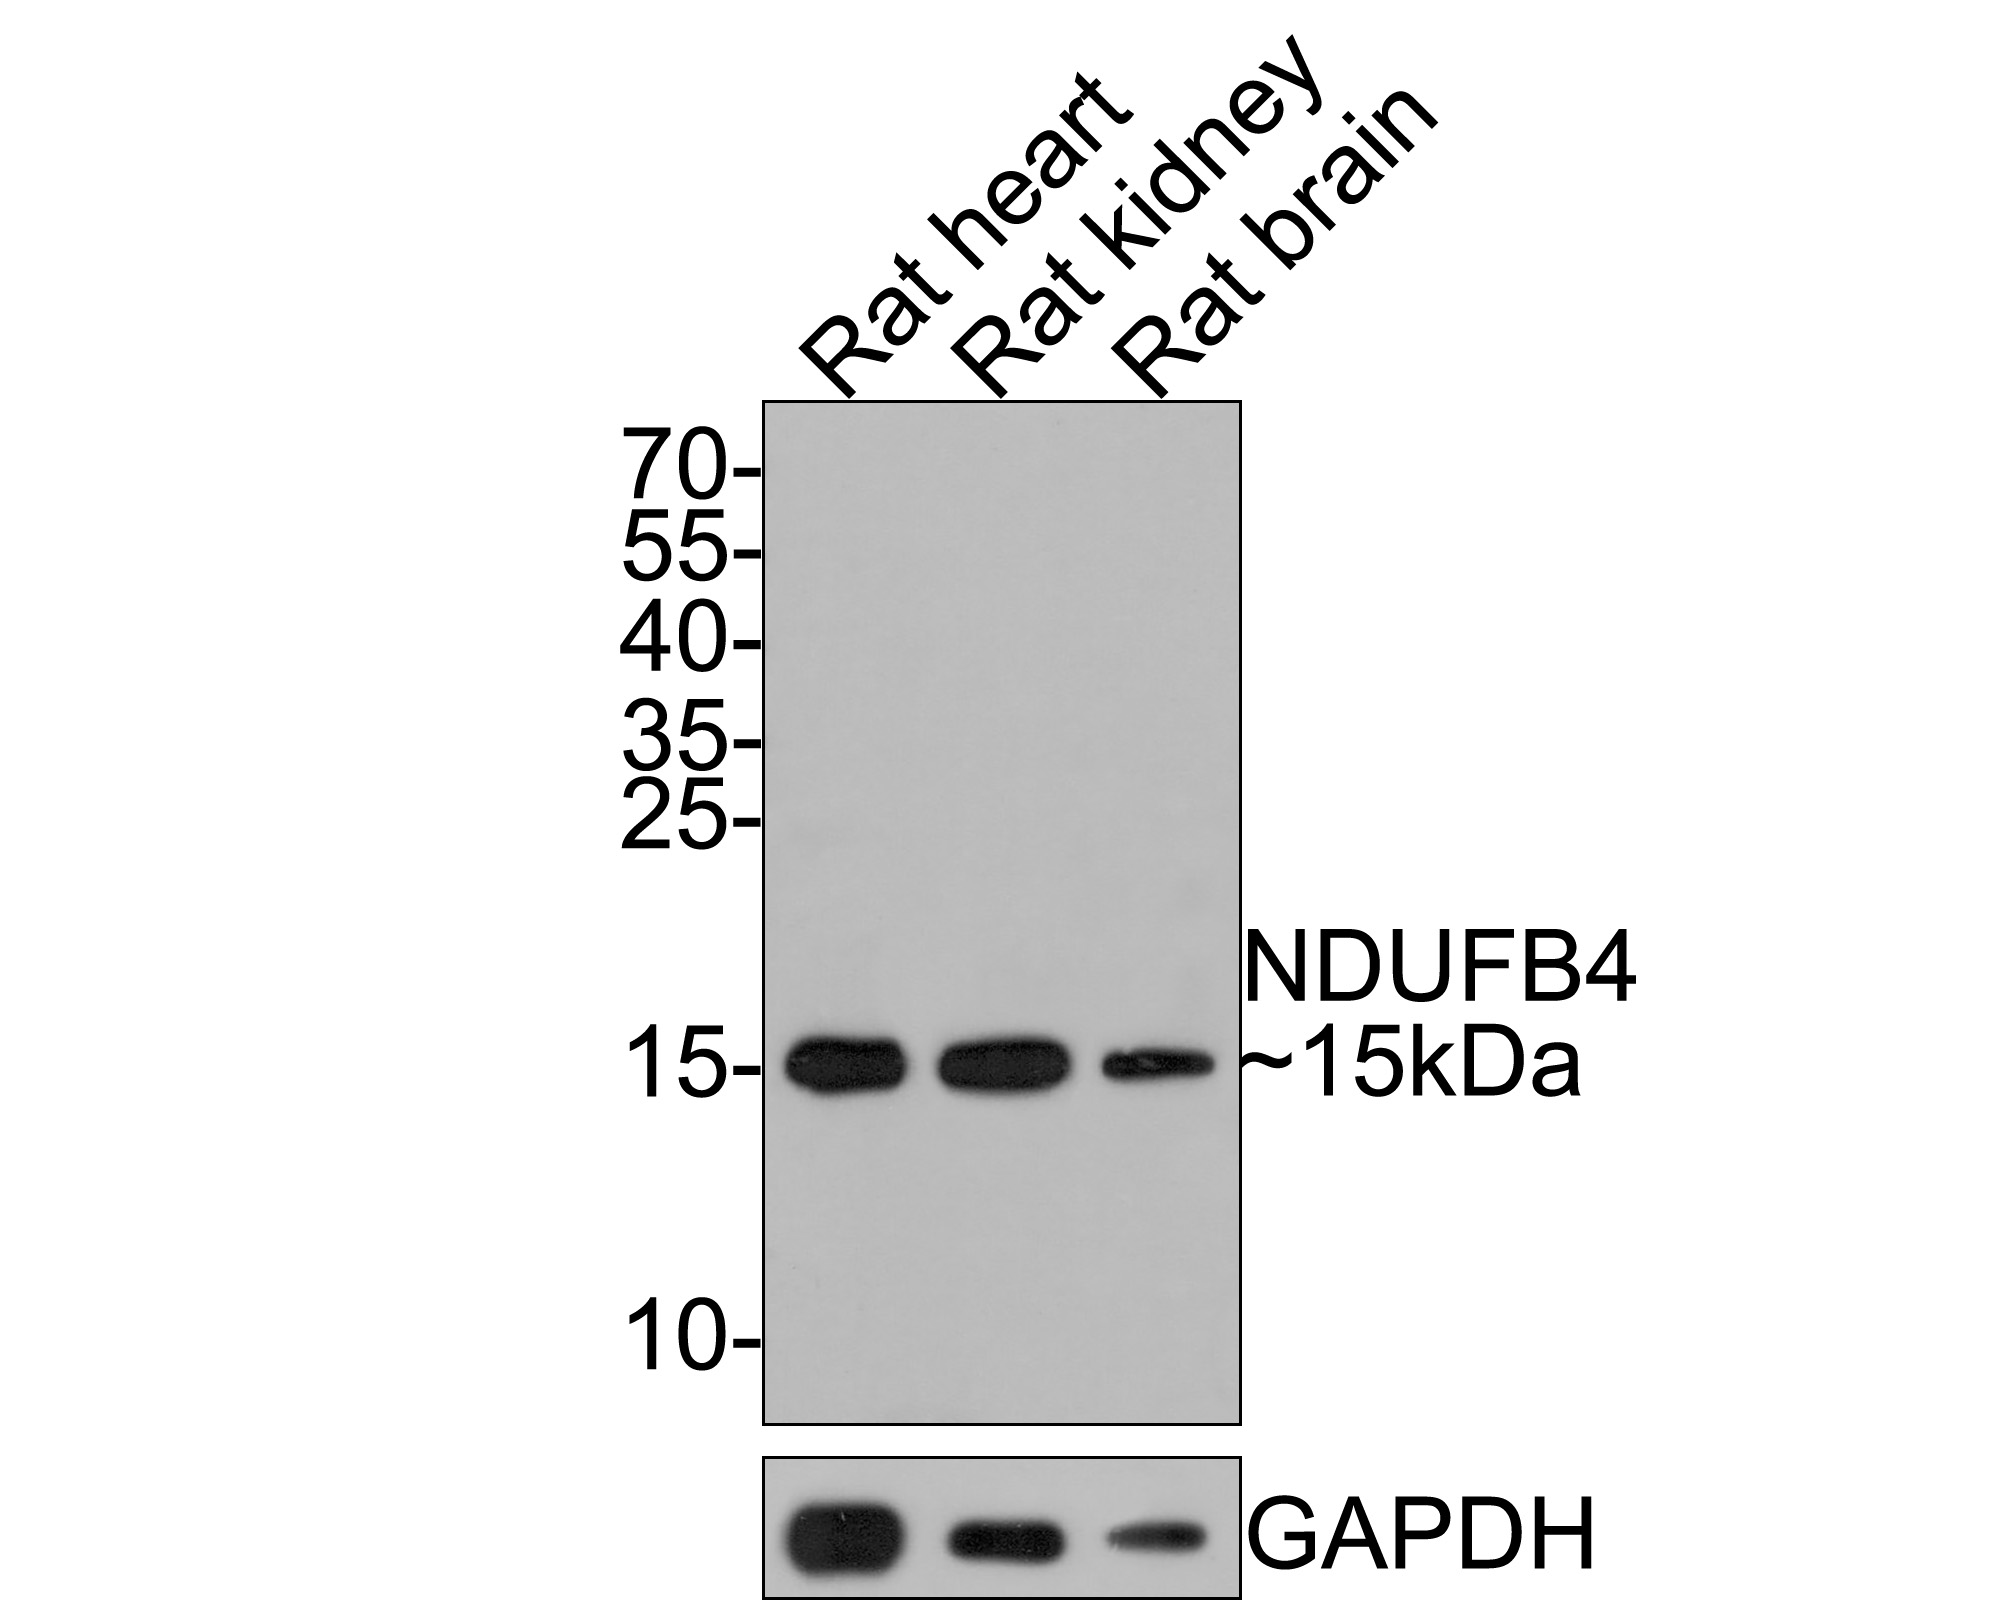 Western blot analysis of NDUFB4 on different lysates with Rabbit anti-NDUFB4 antibody (HA721112) at 1/500 dilution.<br />
<br />
Lane 1: Rat heart tissue lysate<br />
Lane 2: Rat kidney tissue lysate<br />
Lane 3: Rat brain tissue lysate<br />
<br />
Lysates/proteins at 20 µg/Lane.<br />
<br />
Predicted band size: 15 kDa<br />
Observed band size: 15 kDa<br />
<br />
Exposure time: 2 minutes;<br />
<br />
15% SDS-PAGE gel.<br />
<br />
Proteins were transferred to a PVDF membrane and blocked with 5% NFDM/TBST for 1 hour at room temperature. The primary antibody (HA721112) at 1/500 dilution was used in 5% NFDM/TBST at room temperature for 2 hours. Goat Anti-Rabbit IgG - HRP Secondary Antibody (HA1001) at 1:300,000 dilution was used for 1 hour at room temperature.